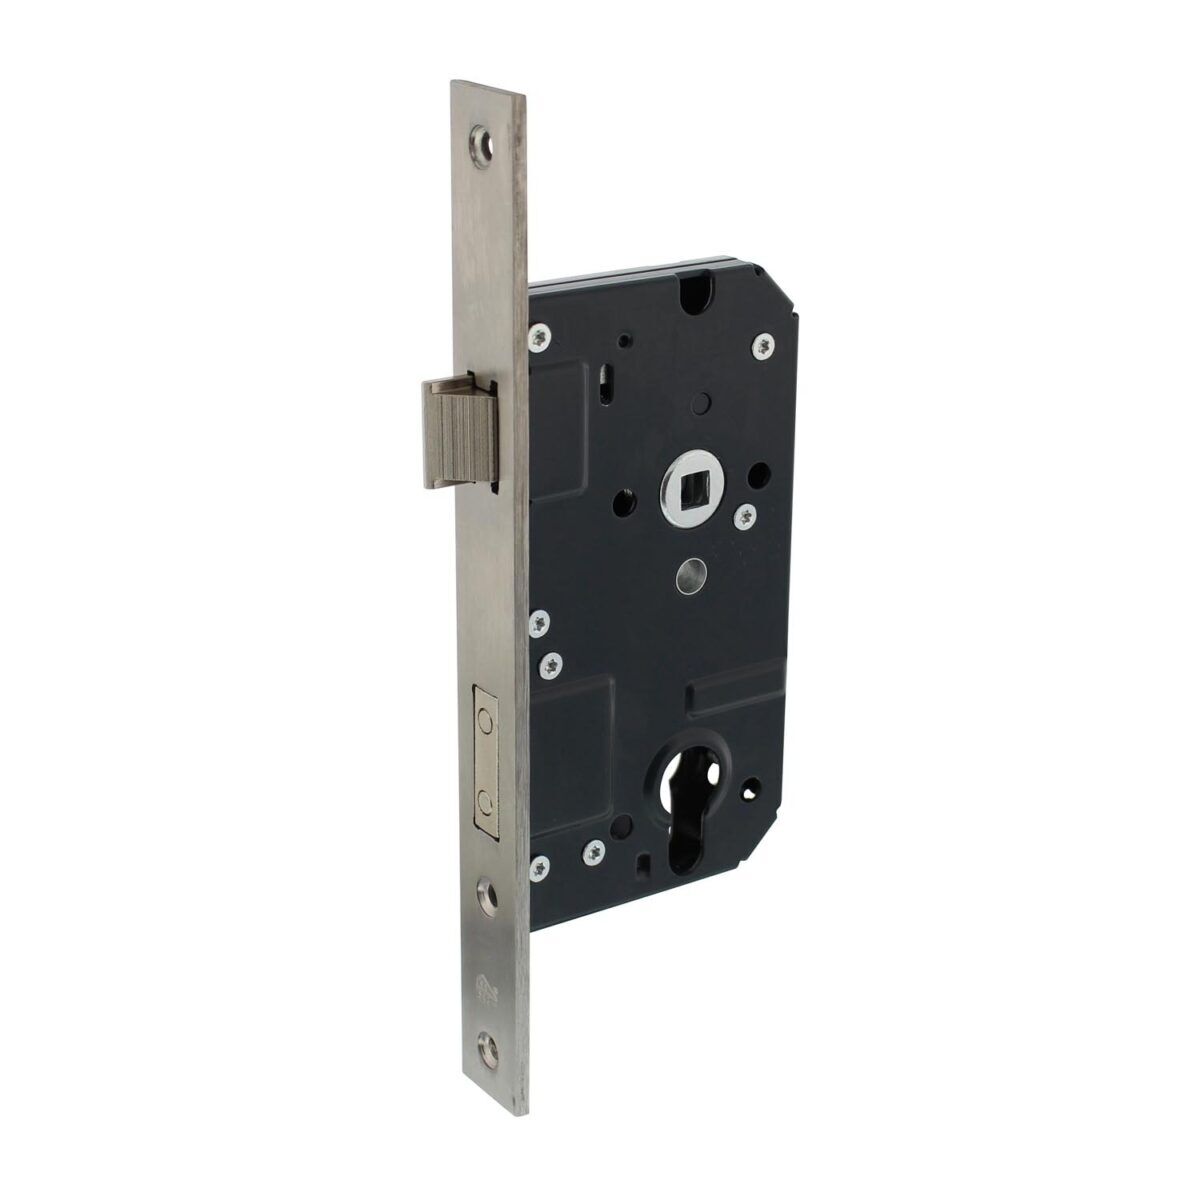 Intersteel Security lock SKG2 profile cylinder hole 72 mm with rectangular front plate 25 x 238 mm